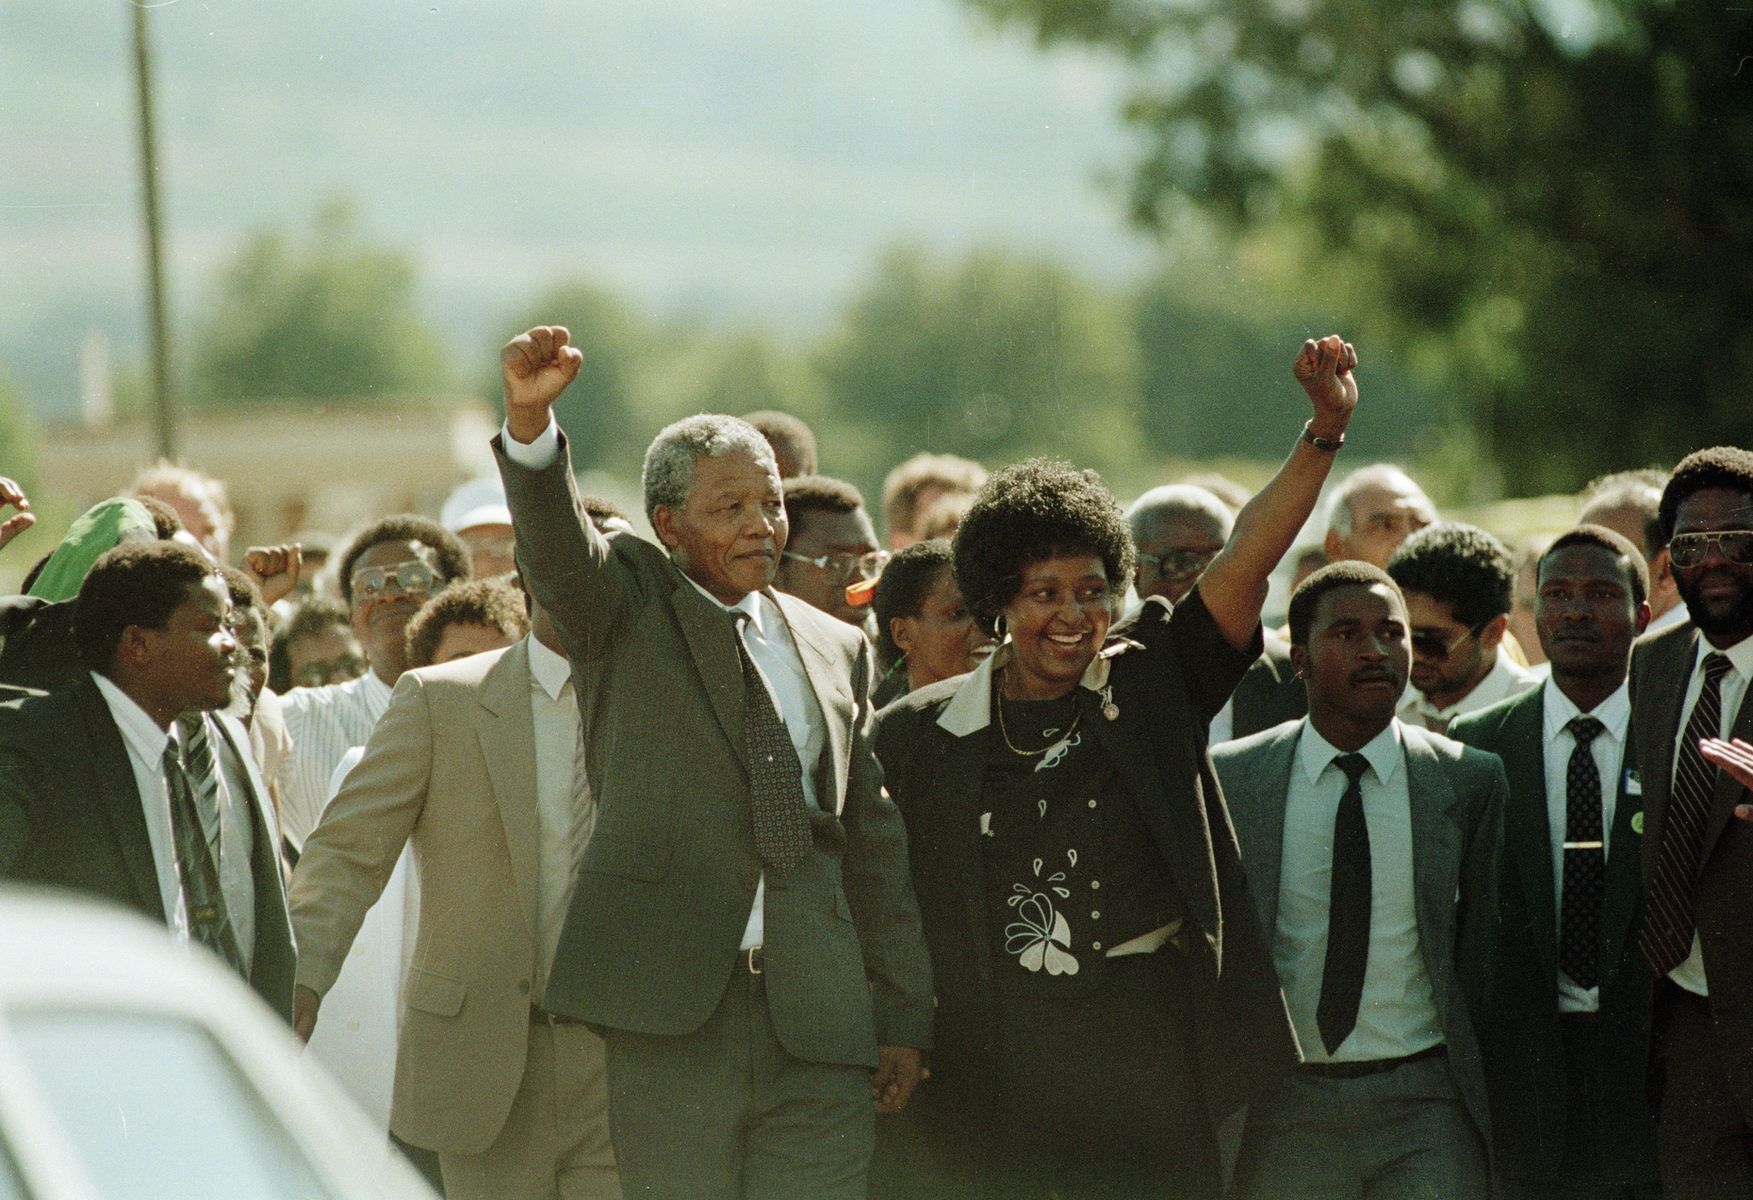 <p>The woman with whom Mandela was associated the longest is <a href="https://www.britannica.com/biography/Winnie-Madikizela-Mandela" rel="noreferrer noopener">Winnie Madikizela</a>, his second wife. After mobilizing South African and international attention throughout her husband’s incarceration, she in turn became an icon of resistance. In the early 1990s, however, she was suspected of infidelity, violence, and extremism. Just as Mandela was advocating for national reconciliation, his wife was <a href="https://www.theguardian.com/world/1991/may/15/southafrica.davidberesford" rel="noreferrer noopener">convicted of complicity in the kidnapping and murder of a teenager</a>. The couple separated after 38 years of marriage.</p>